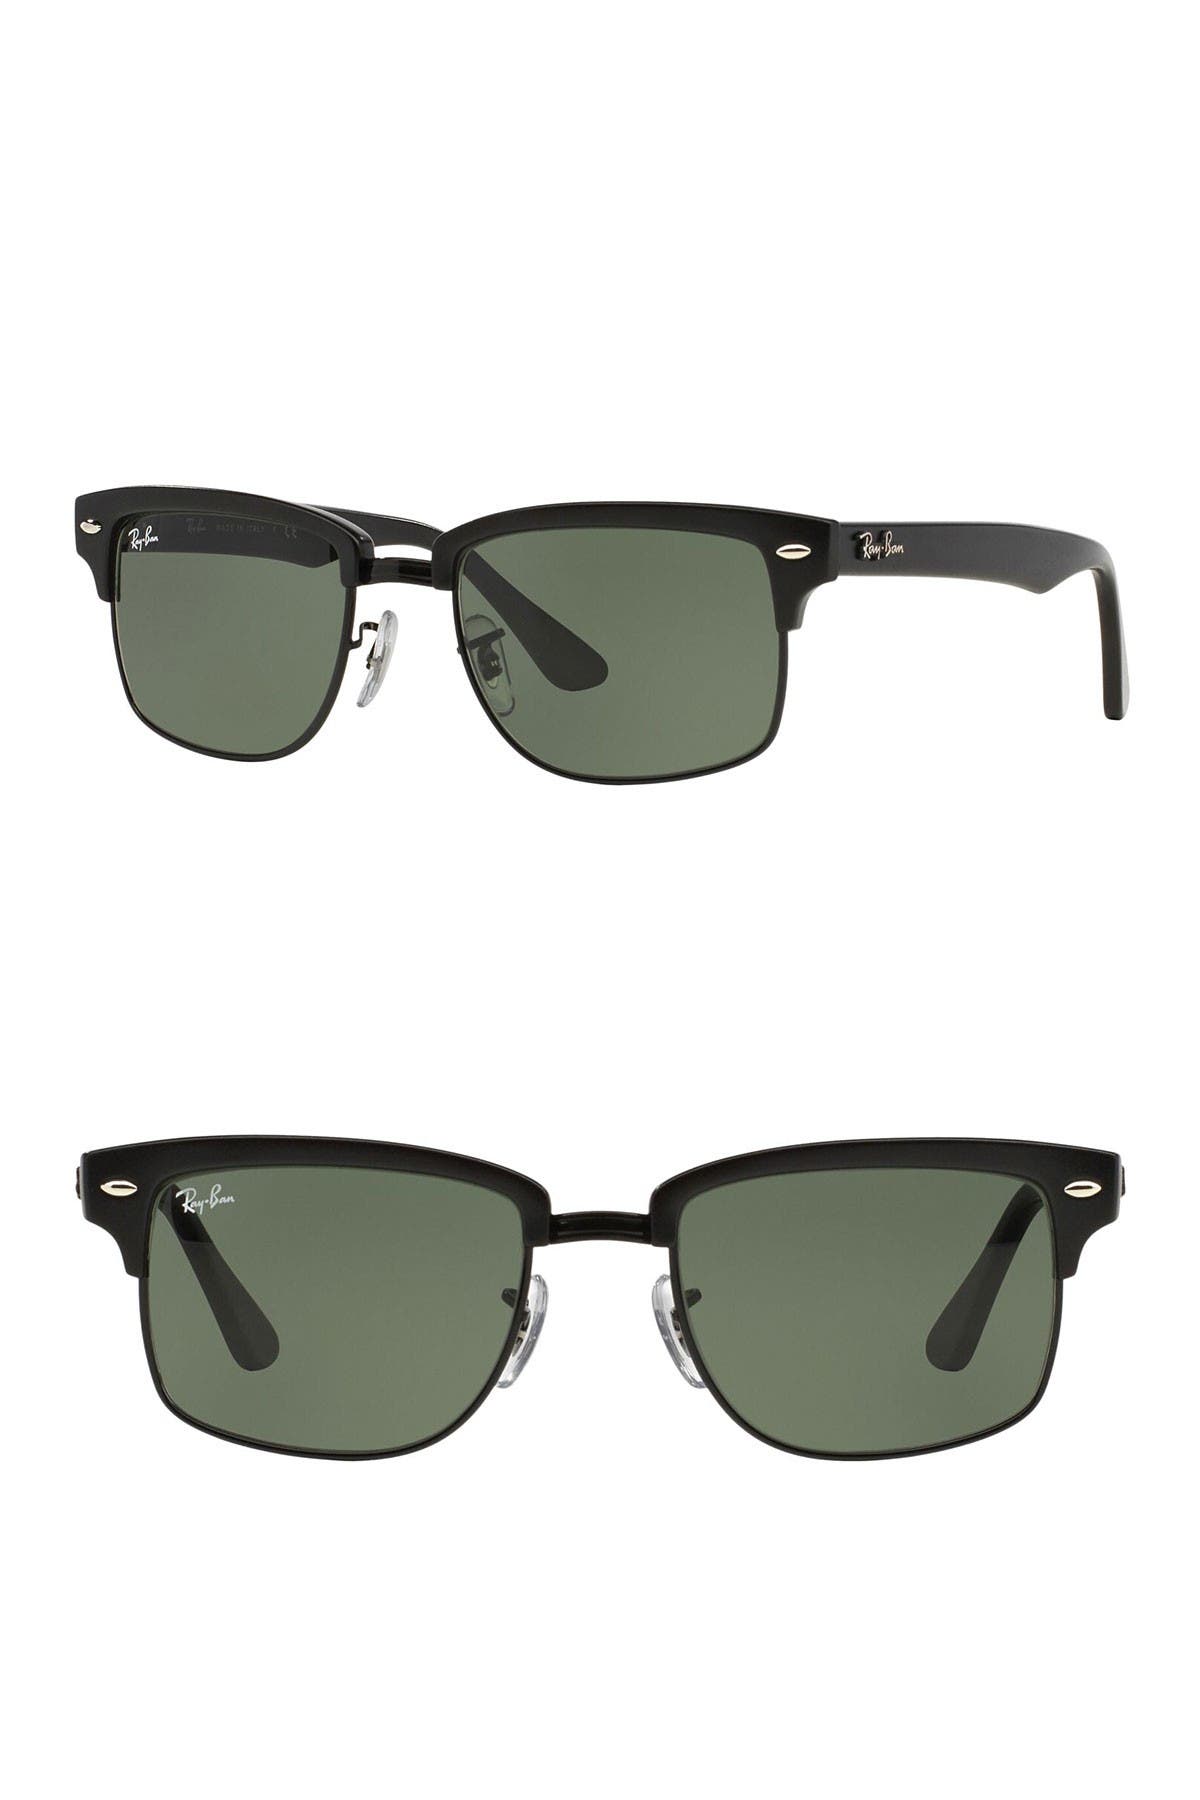 Ray Ban 52mm Clubmaster Square Sunglasses Nordstrom Rack